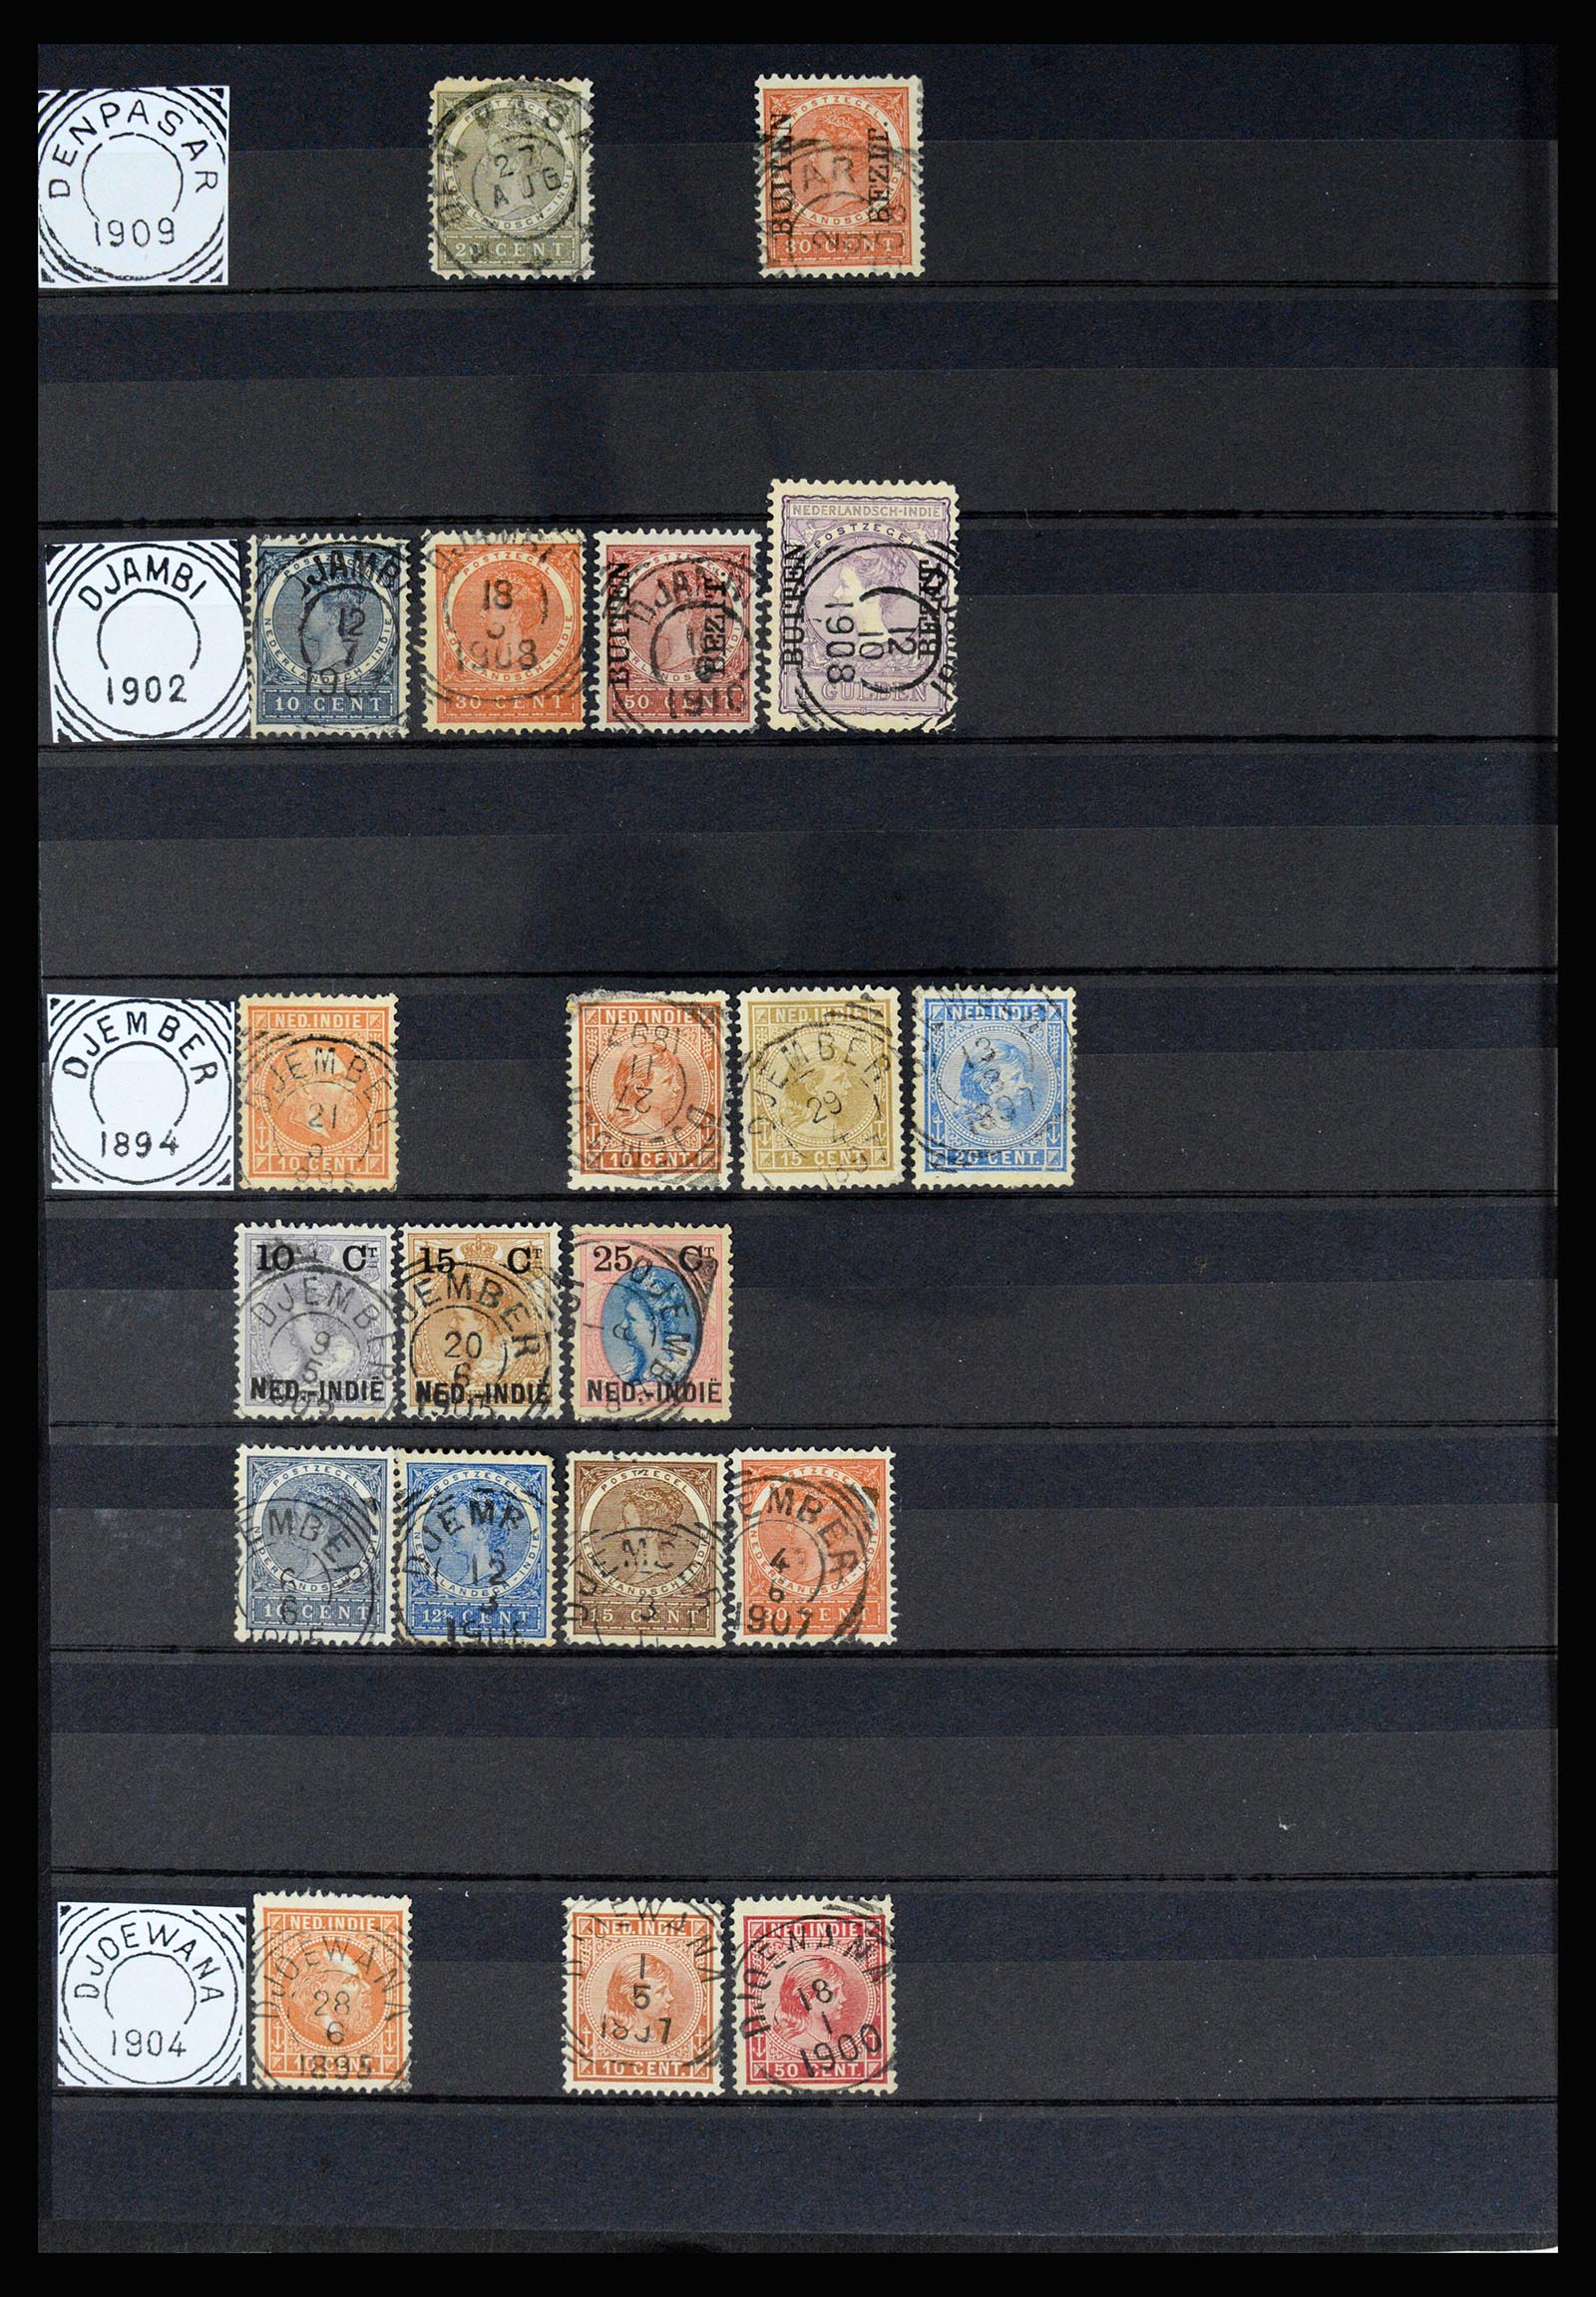 36839 013 - Stamp collection 36839 Dutch east Indies square cancels.